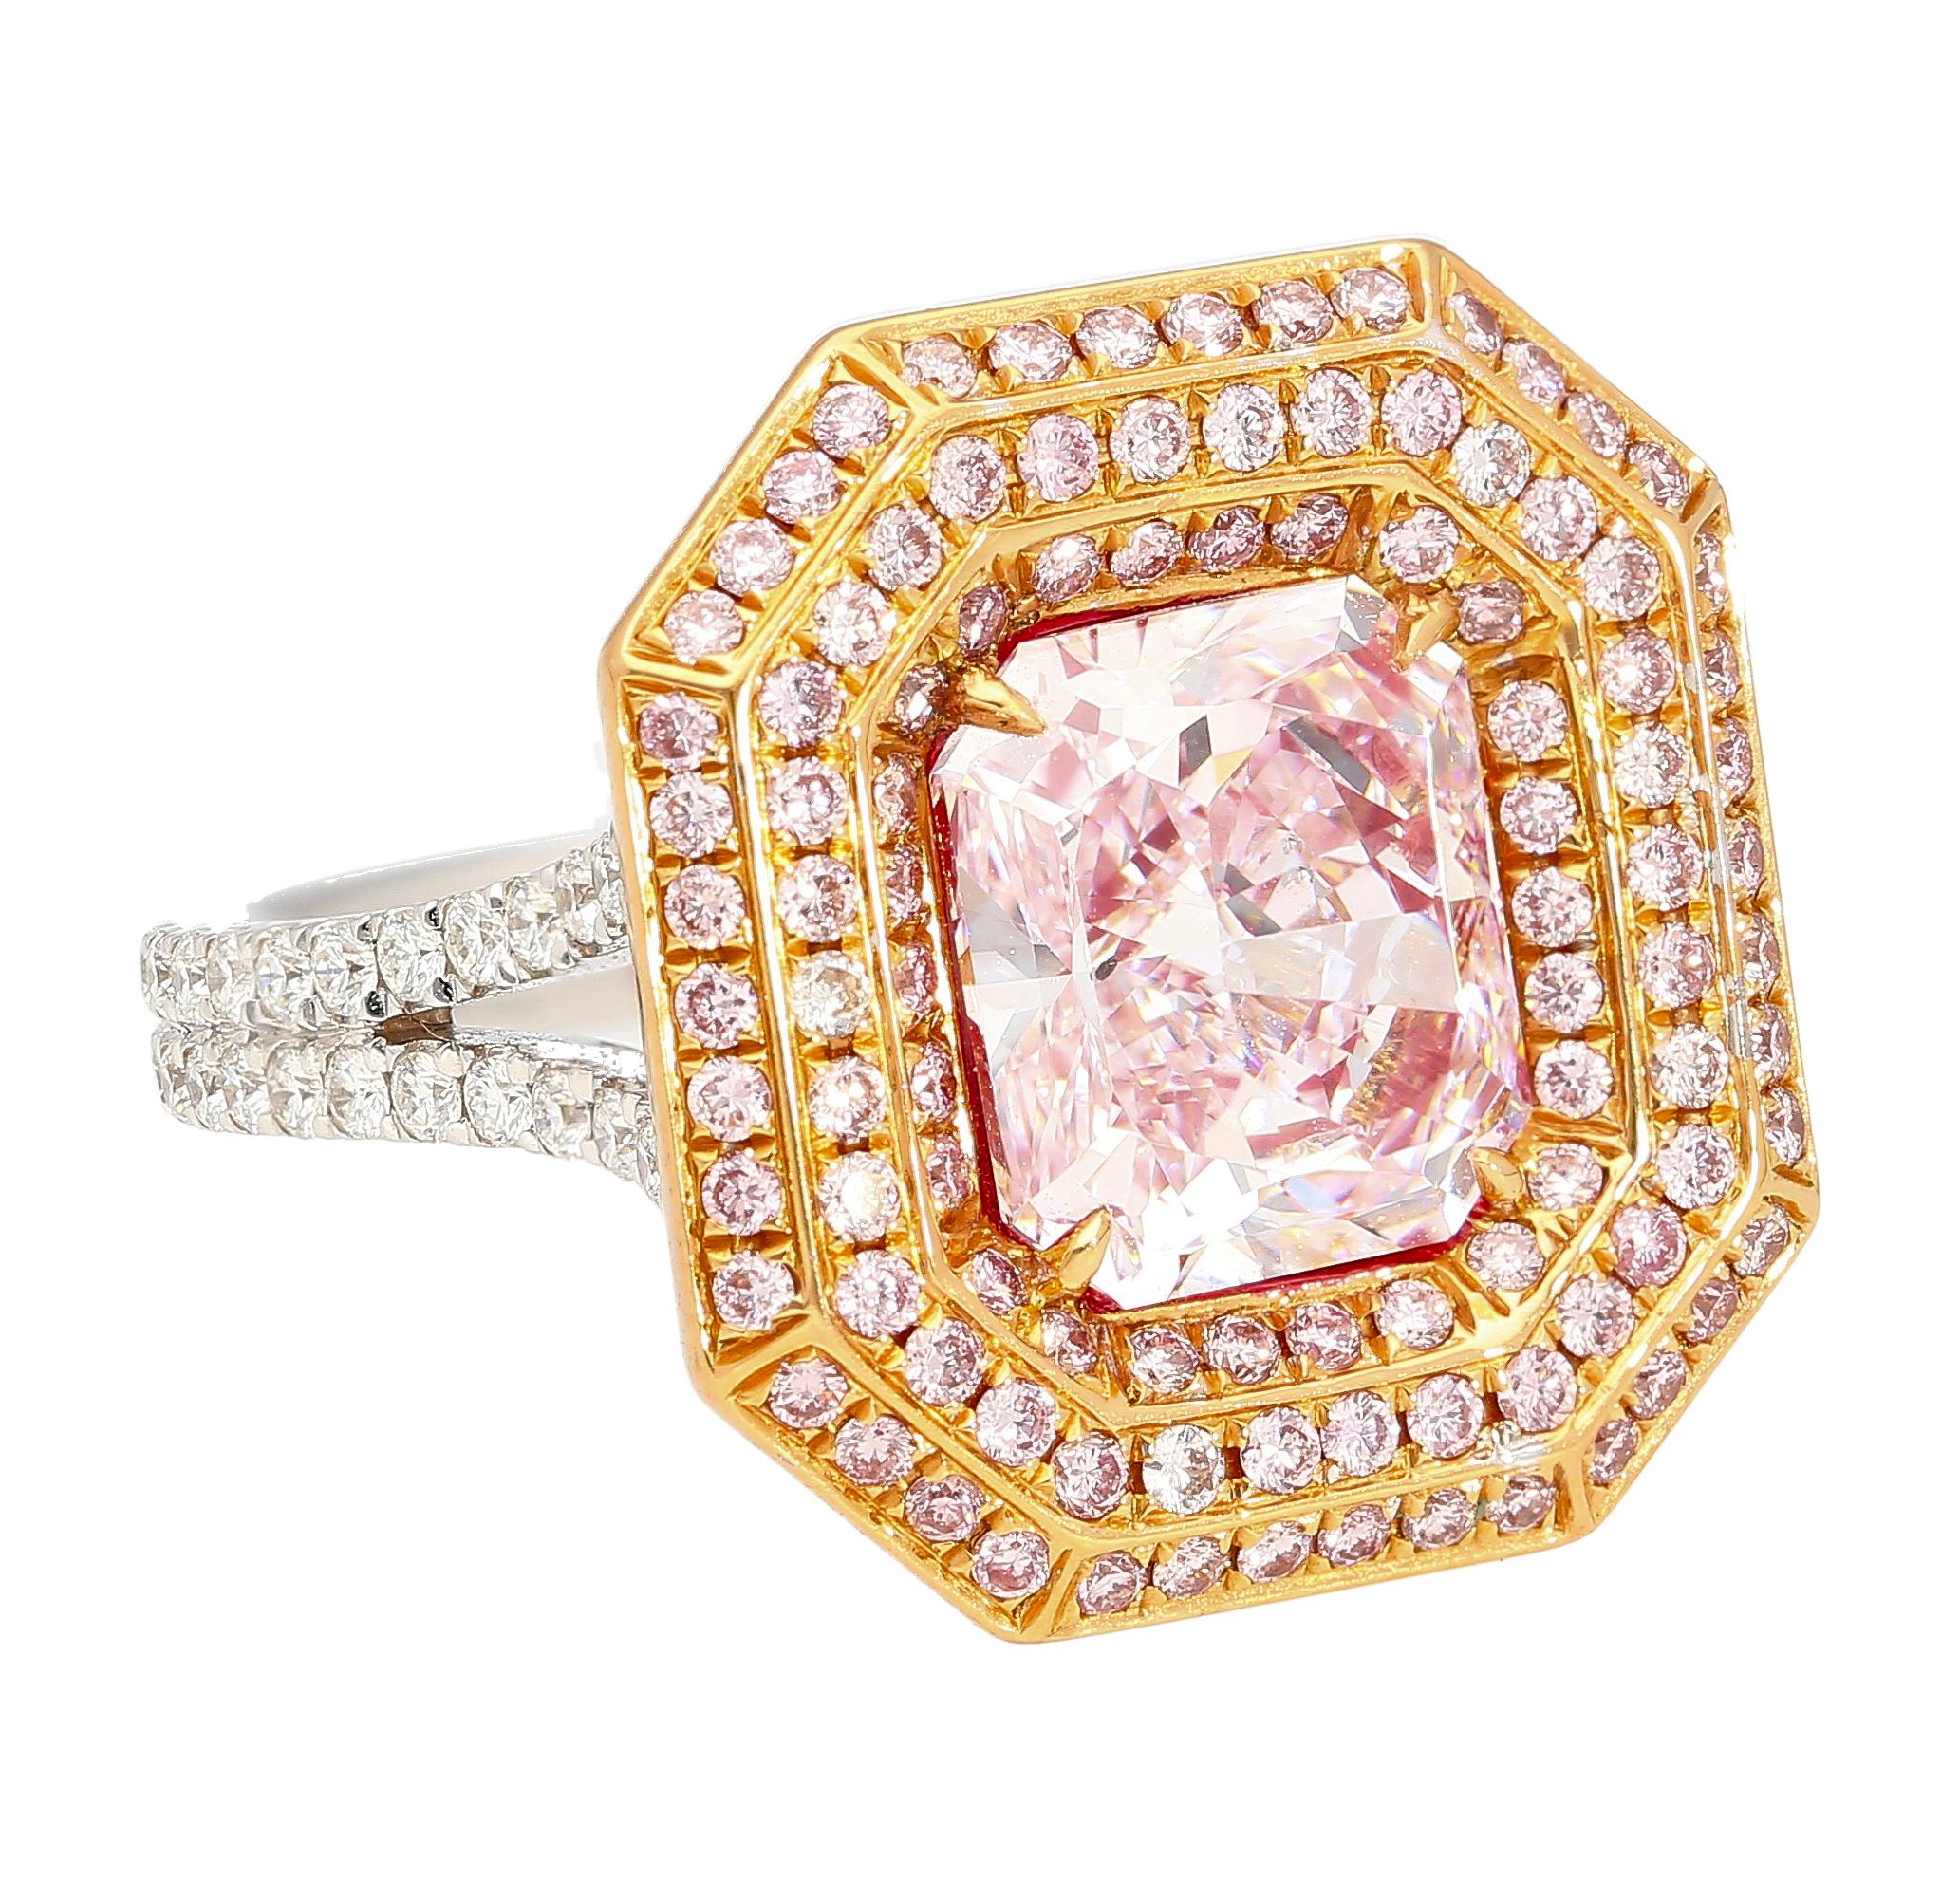 GIA Certified natural 3.48 carat fancy light pink radiant cut SI1 clarity diamond ring. Set in 18k white and rose gold with a triple halo of round brilliant-cut pink diamonds. Wide frame with a cathedral and split shank of pave set white diamonds.